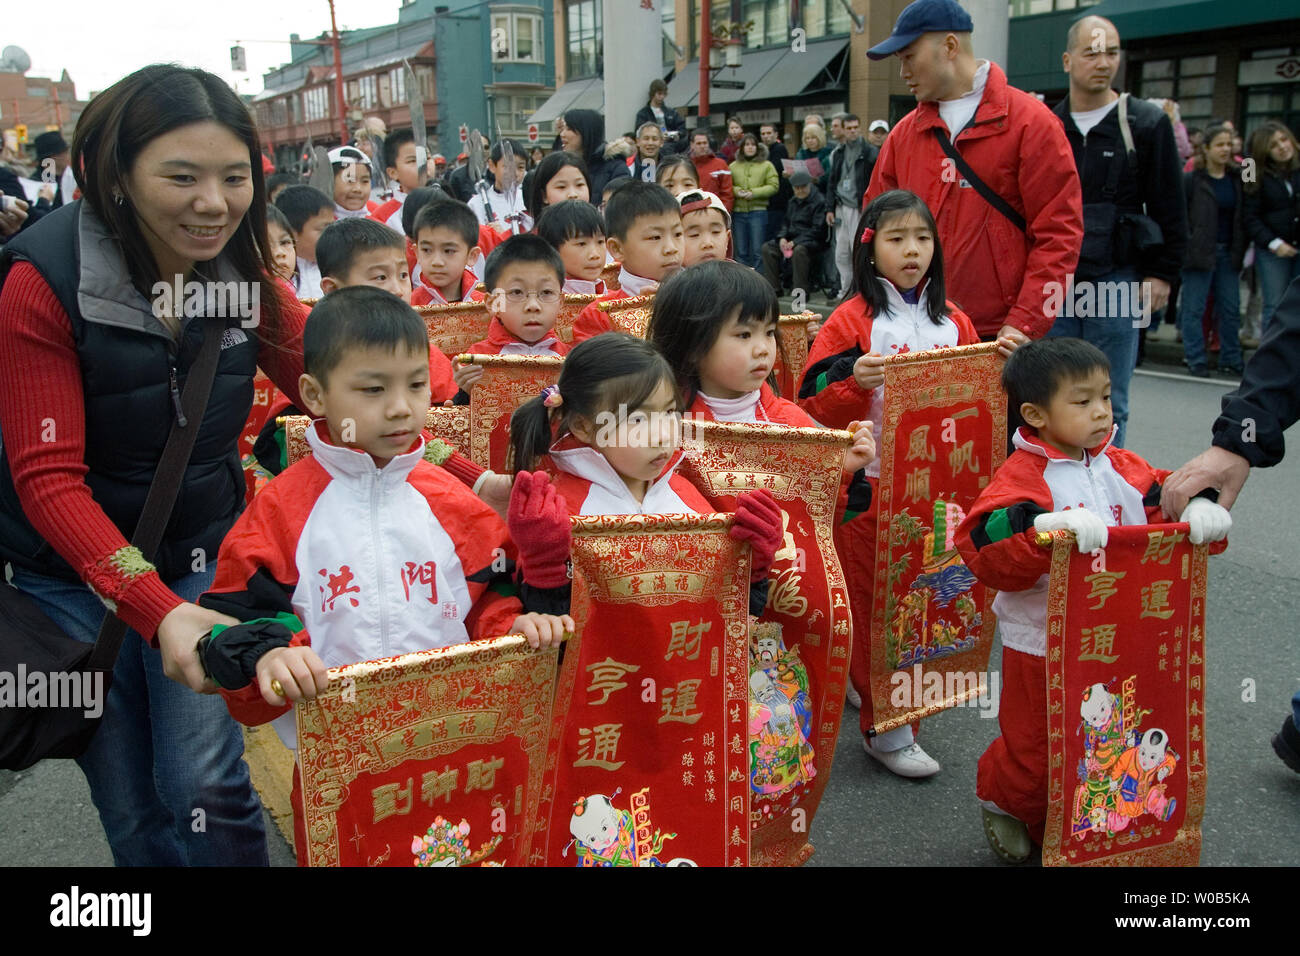 Children carrying banners bringing good luck and prosperity are guided through Chinatown during the Chinese New Year Parade celebrating the Year of the Boar in Vancouver, B.C., February 18, 2007. Crowds numbering in the tens of thousands turn out for this event.  (UPI Photo/Heinz Ruckemann) Stock Photo